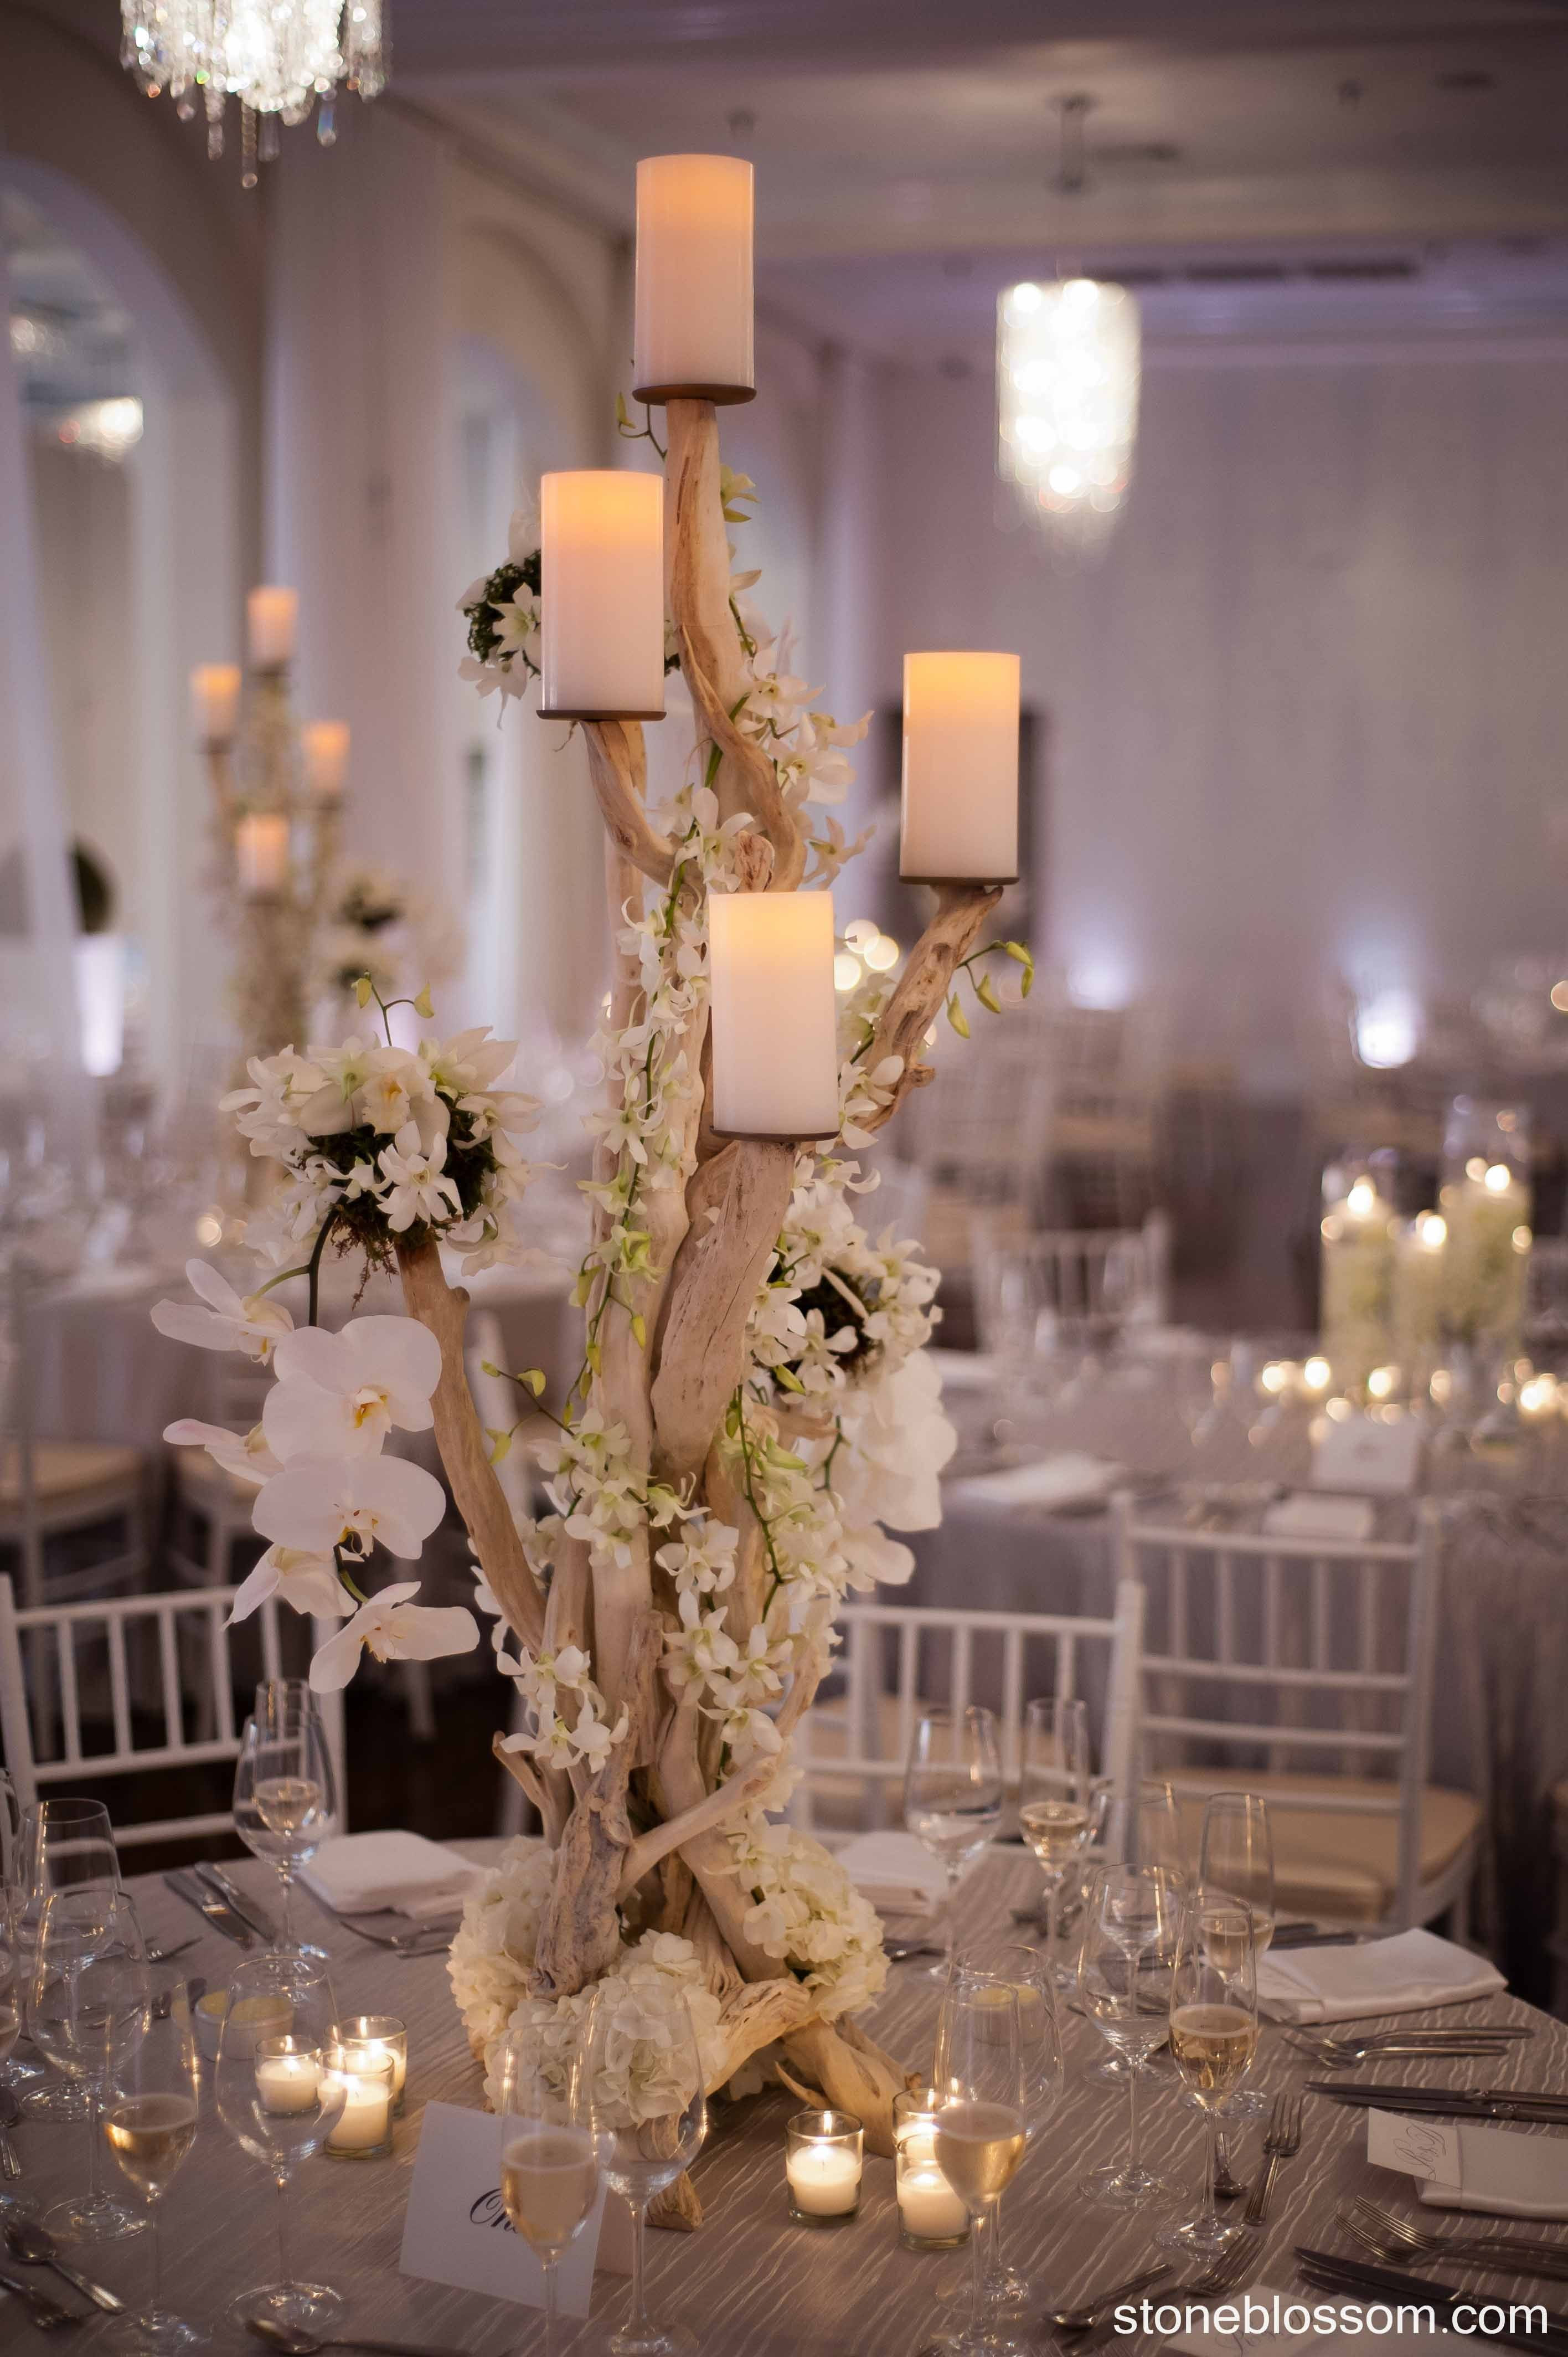 10 Ideal Tall Vases for Wedding Reception Centerpieces 2024 free download tall vases for wedding reception centerpieces of decorative branches for weddings awesome tall vase centerpiece ideas within decorative branches for weddings luxury floral amp event design b